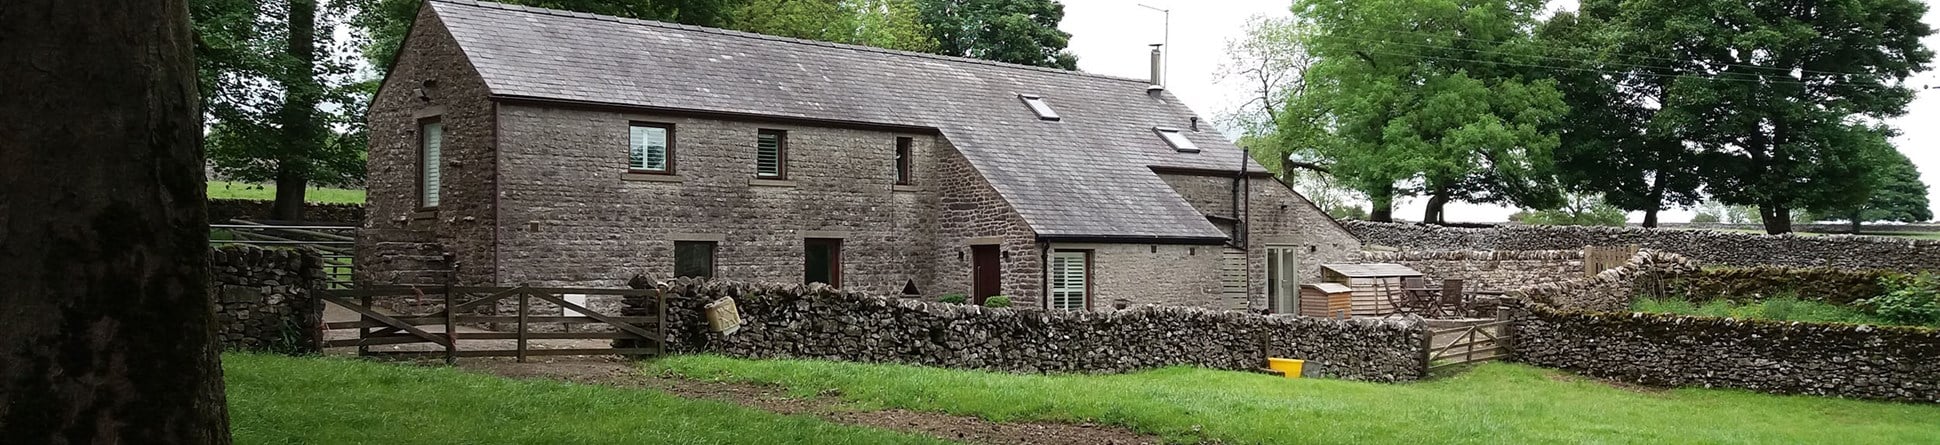 Stone farm building with grey slate tile roof set in fields bordered by dry stone walls with large trees dotted around and a dry stone wall running in front of the house.